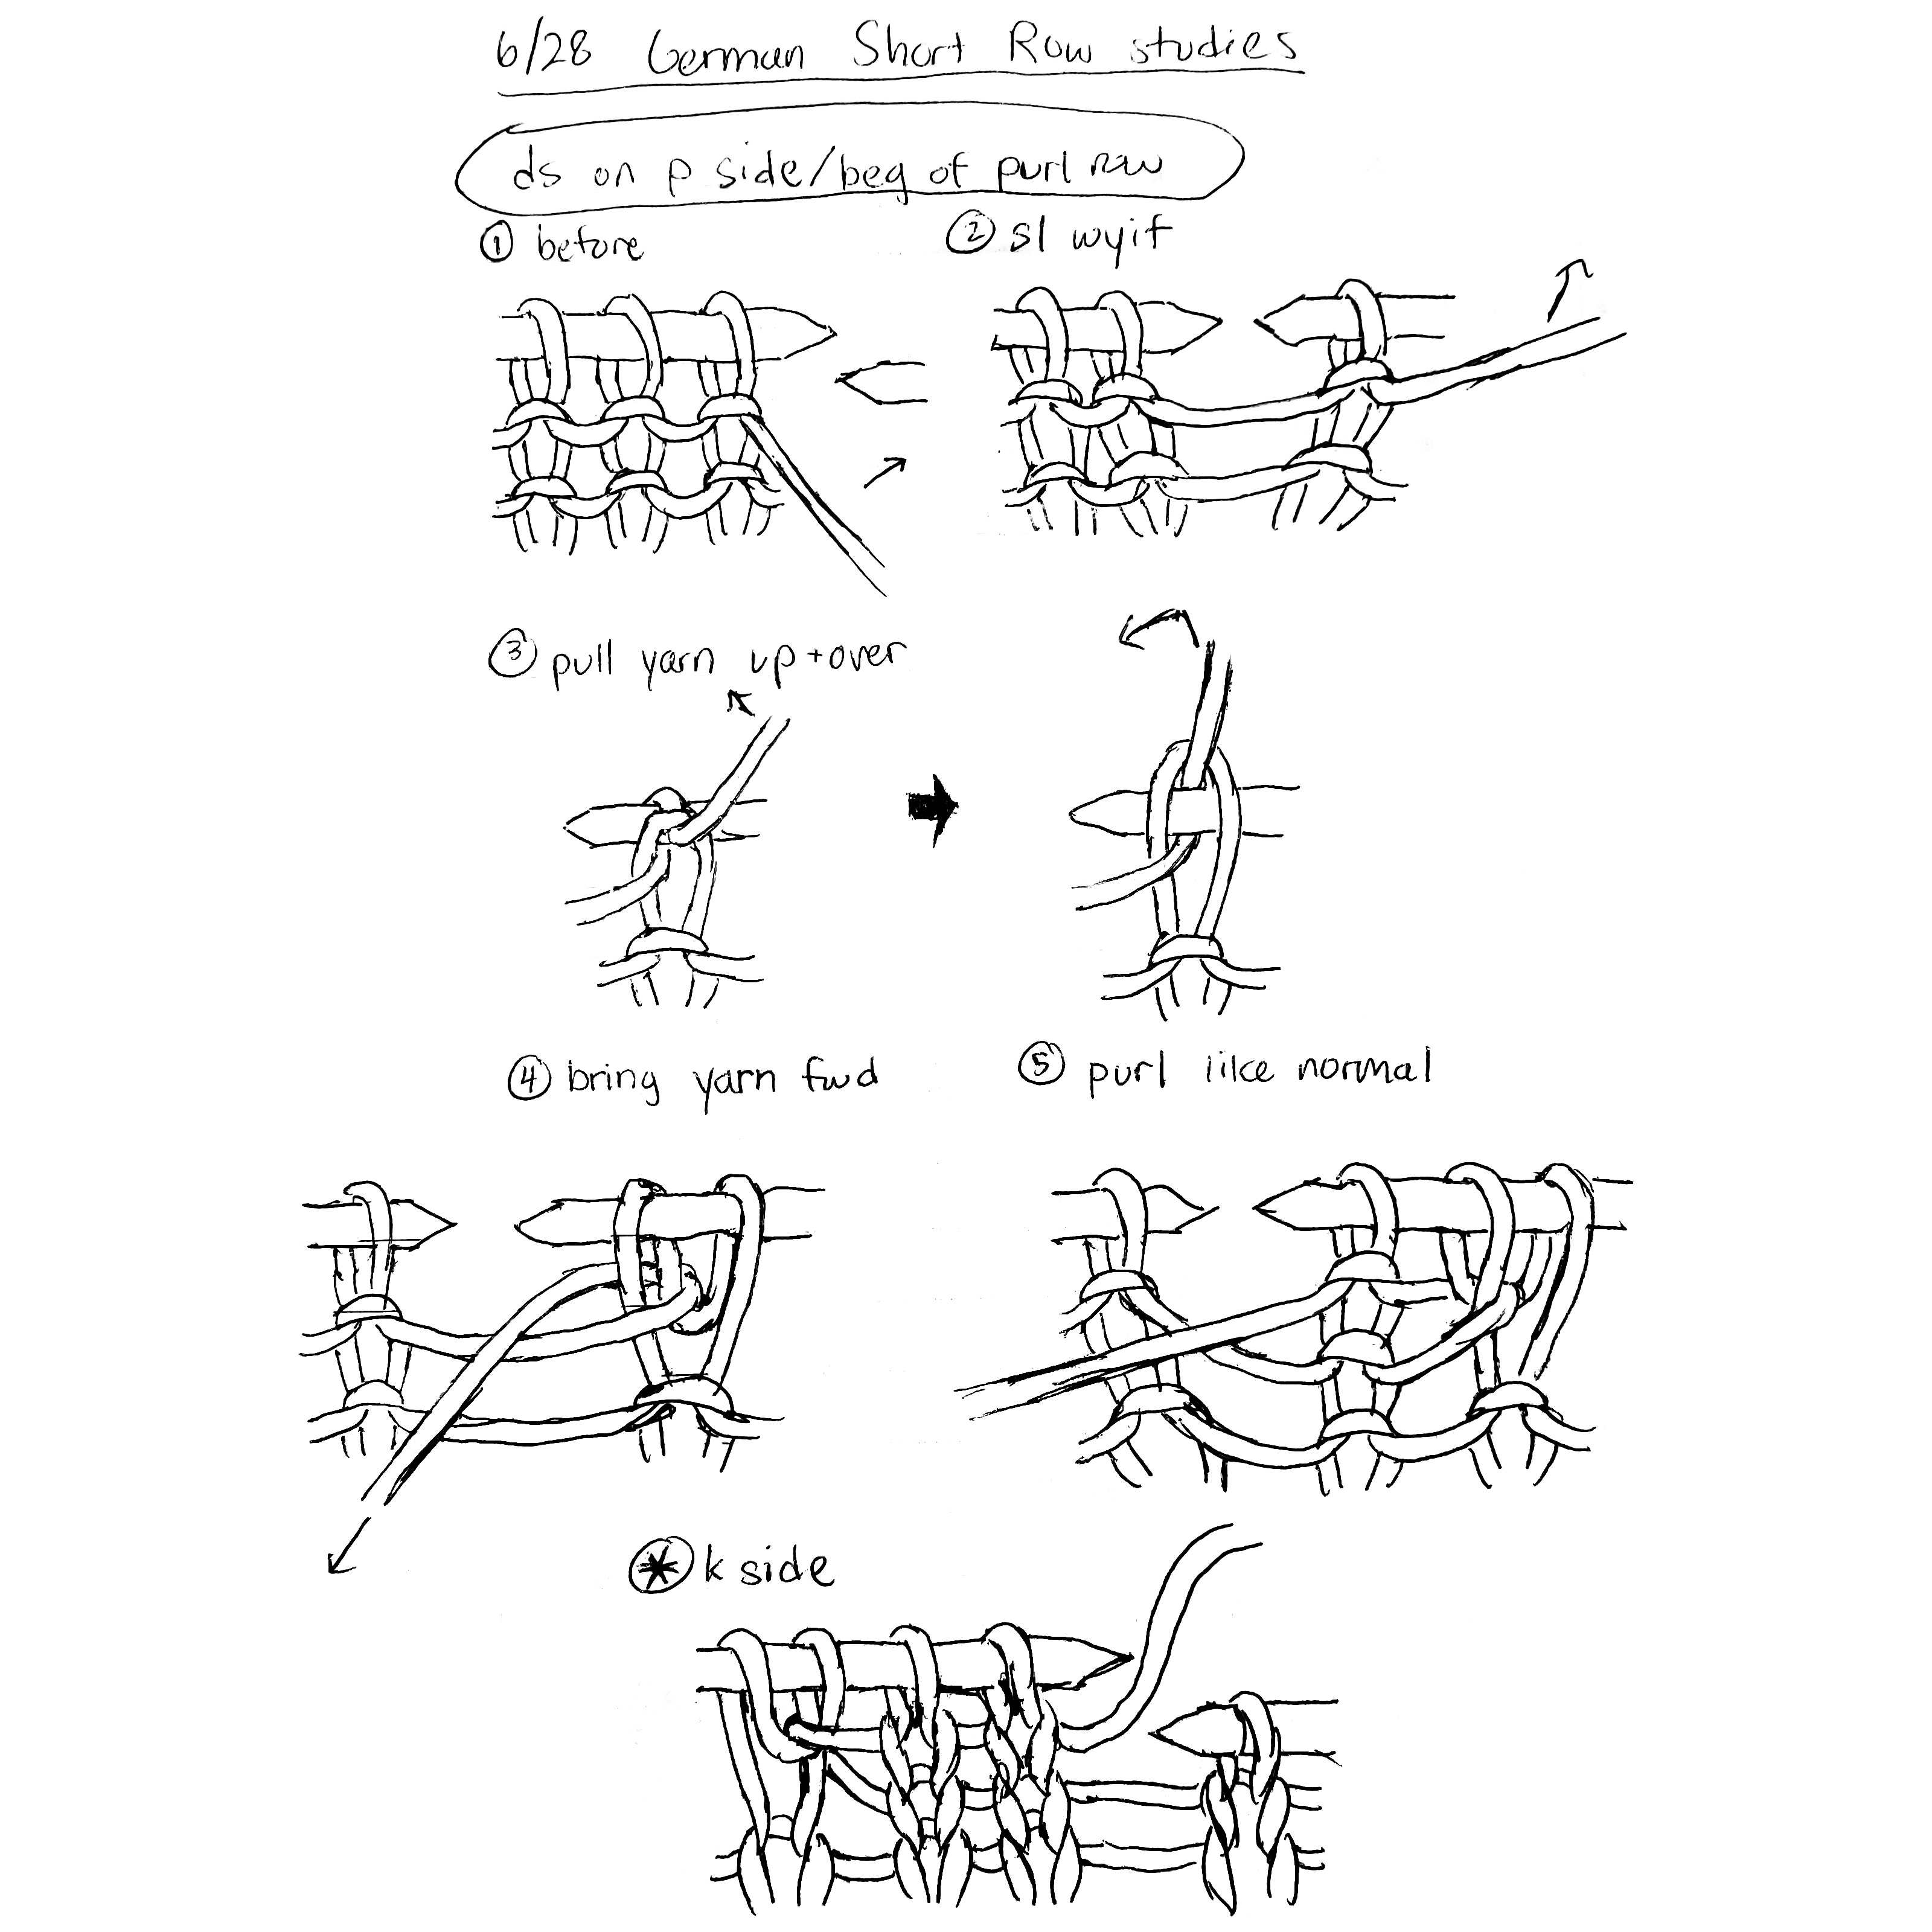 Step-by-step drawings of needles and yarn making a double stitch